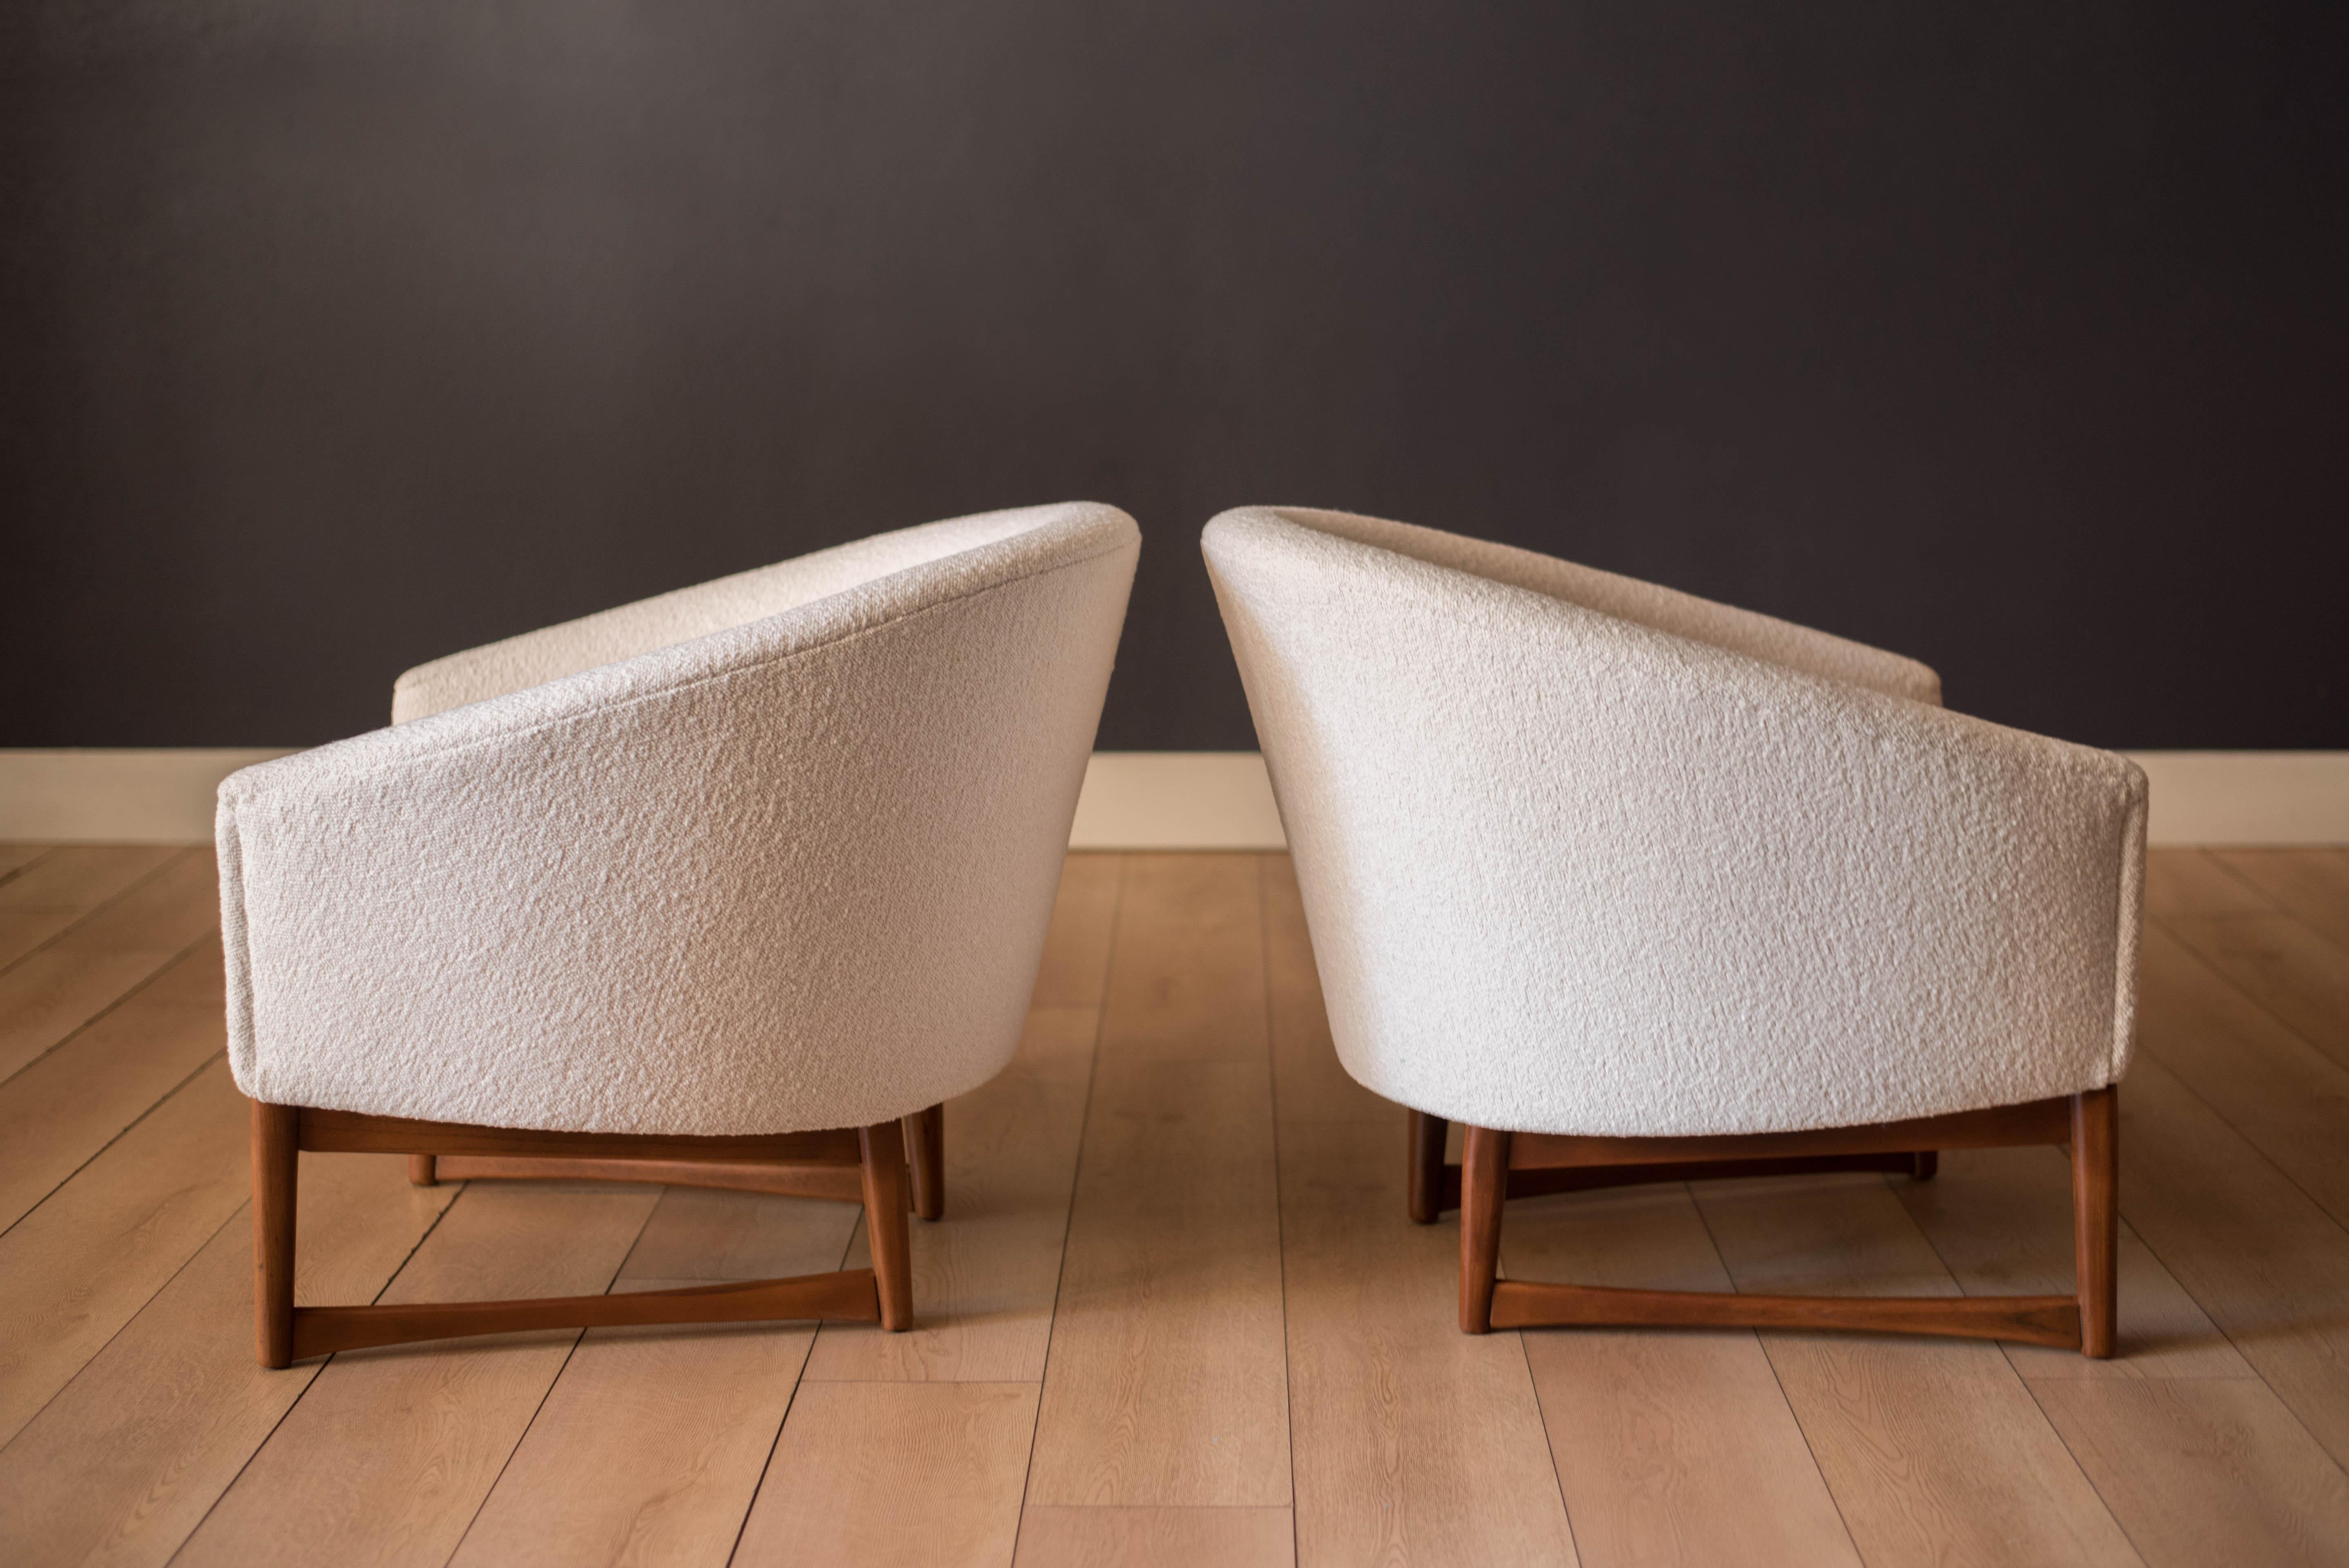 Mid century modern pair of round barrel tub chairs designed by Lawrence Peabody for Richardson Nemschoff, circa 1950's. This set has been newly reupholstered in a soft white boucle textile fabric. Features a contrasting angular solid wood base